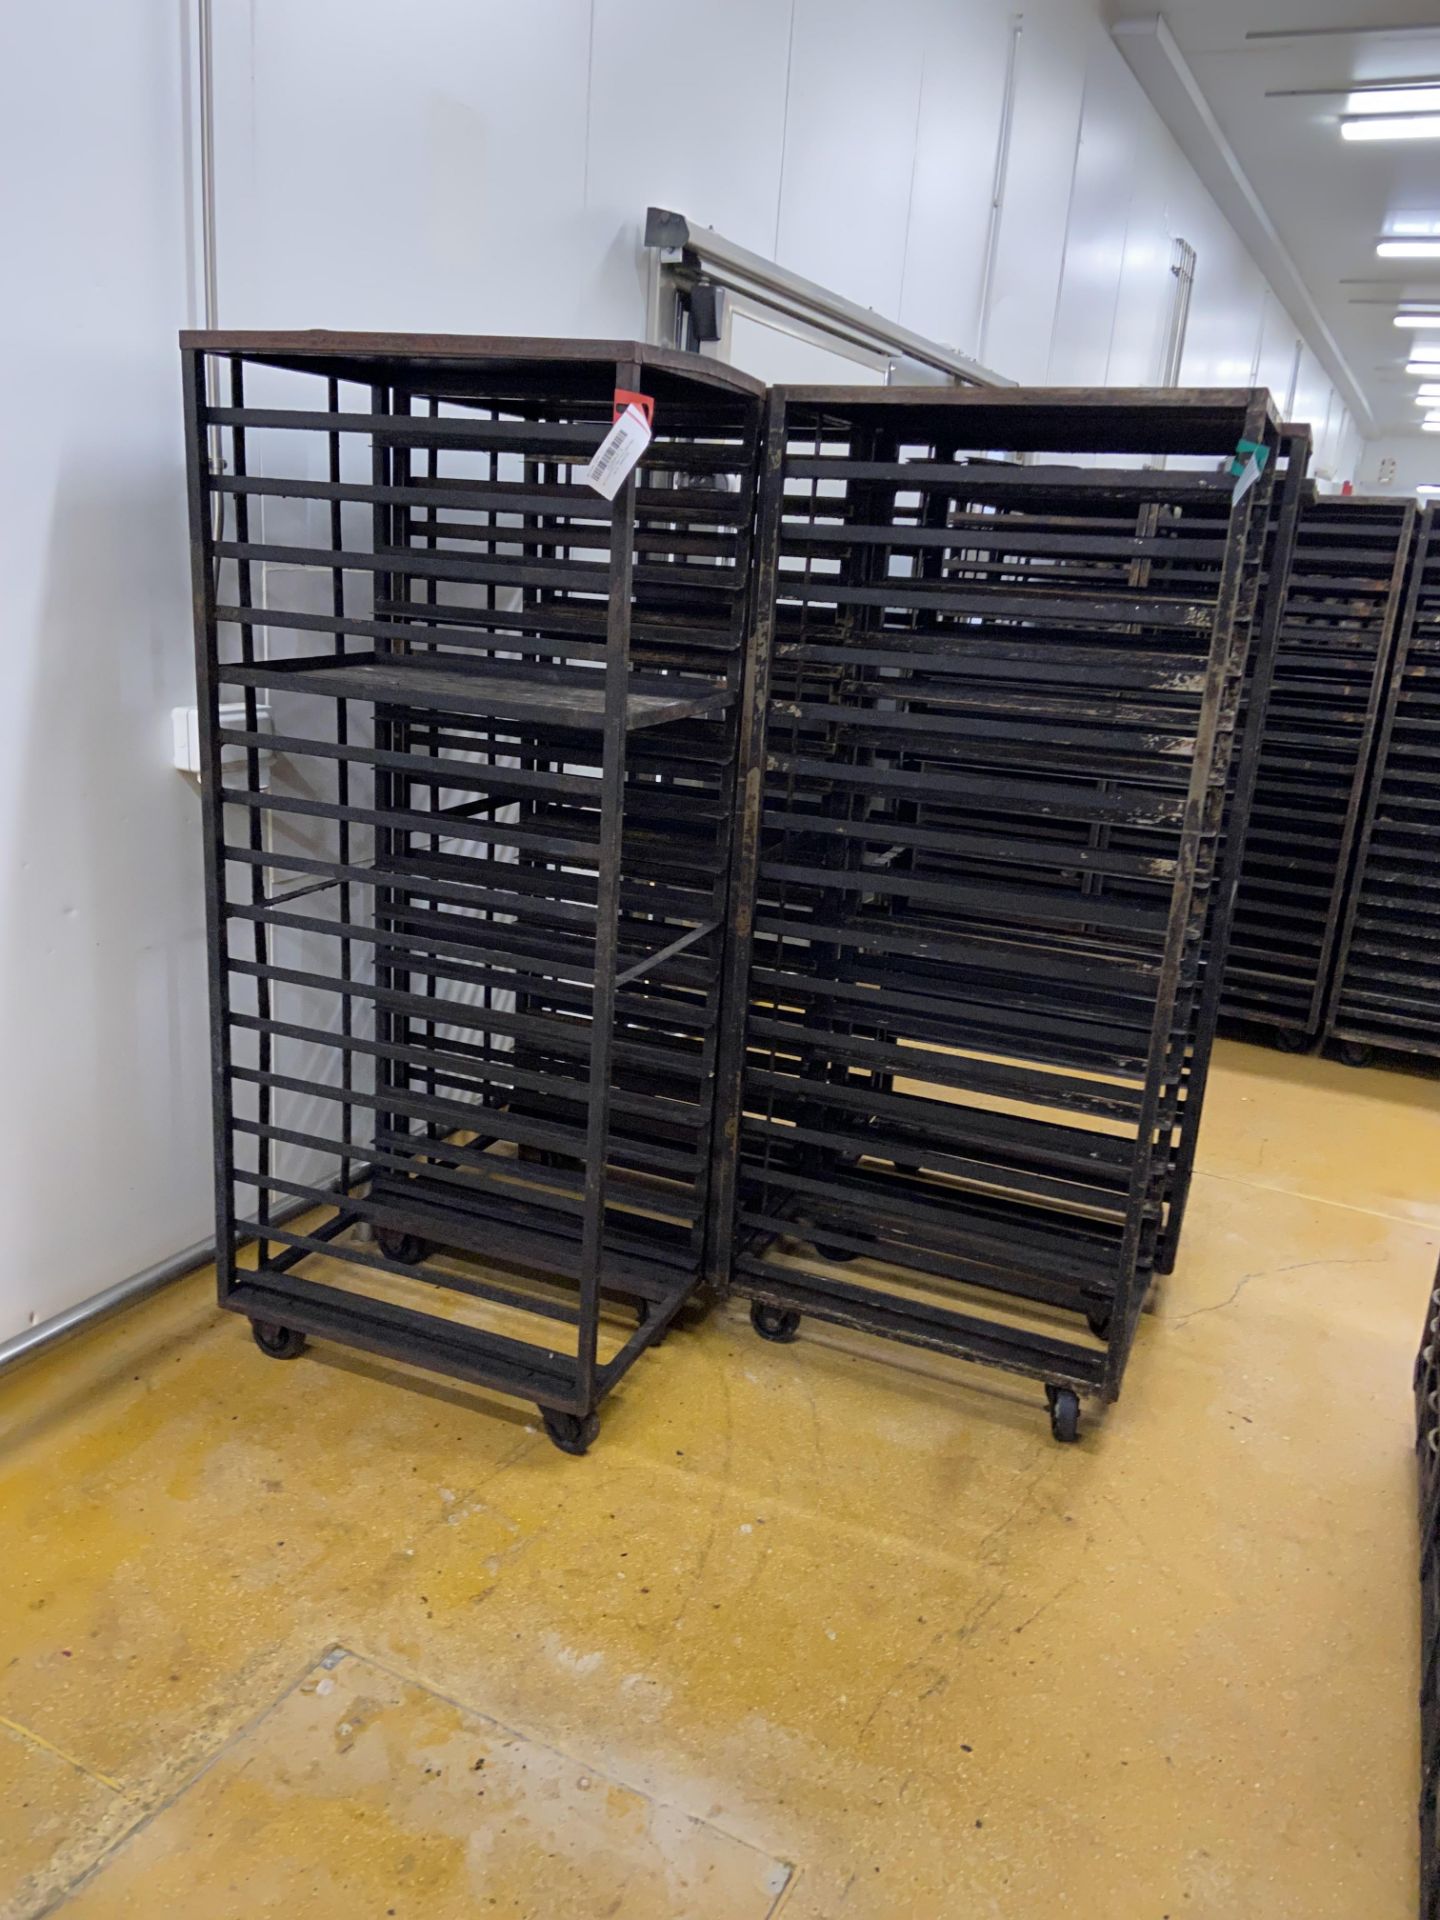 20 Stainless Steel Multi-Tier Mobile Tray Racks, each approx. 760mm x 530mm x 1780mm high, with a - Image 3 of 5